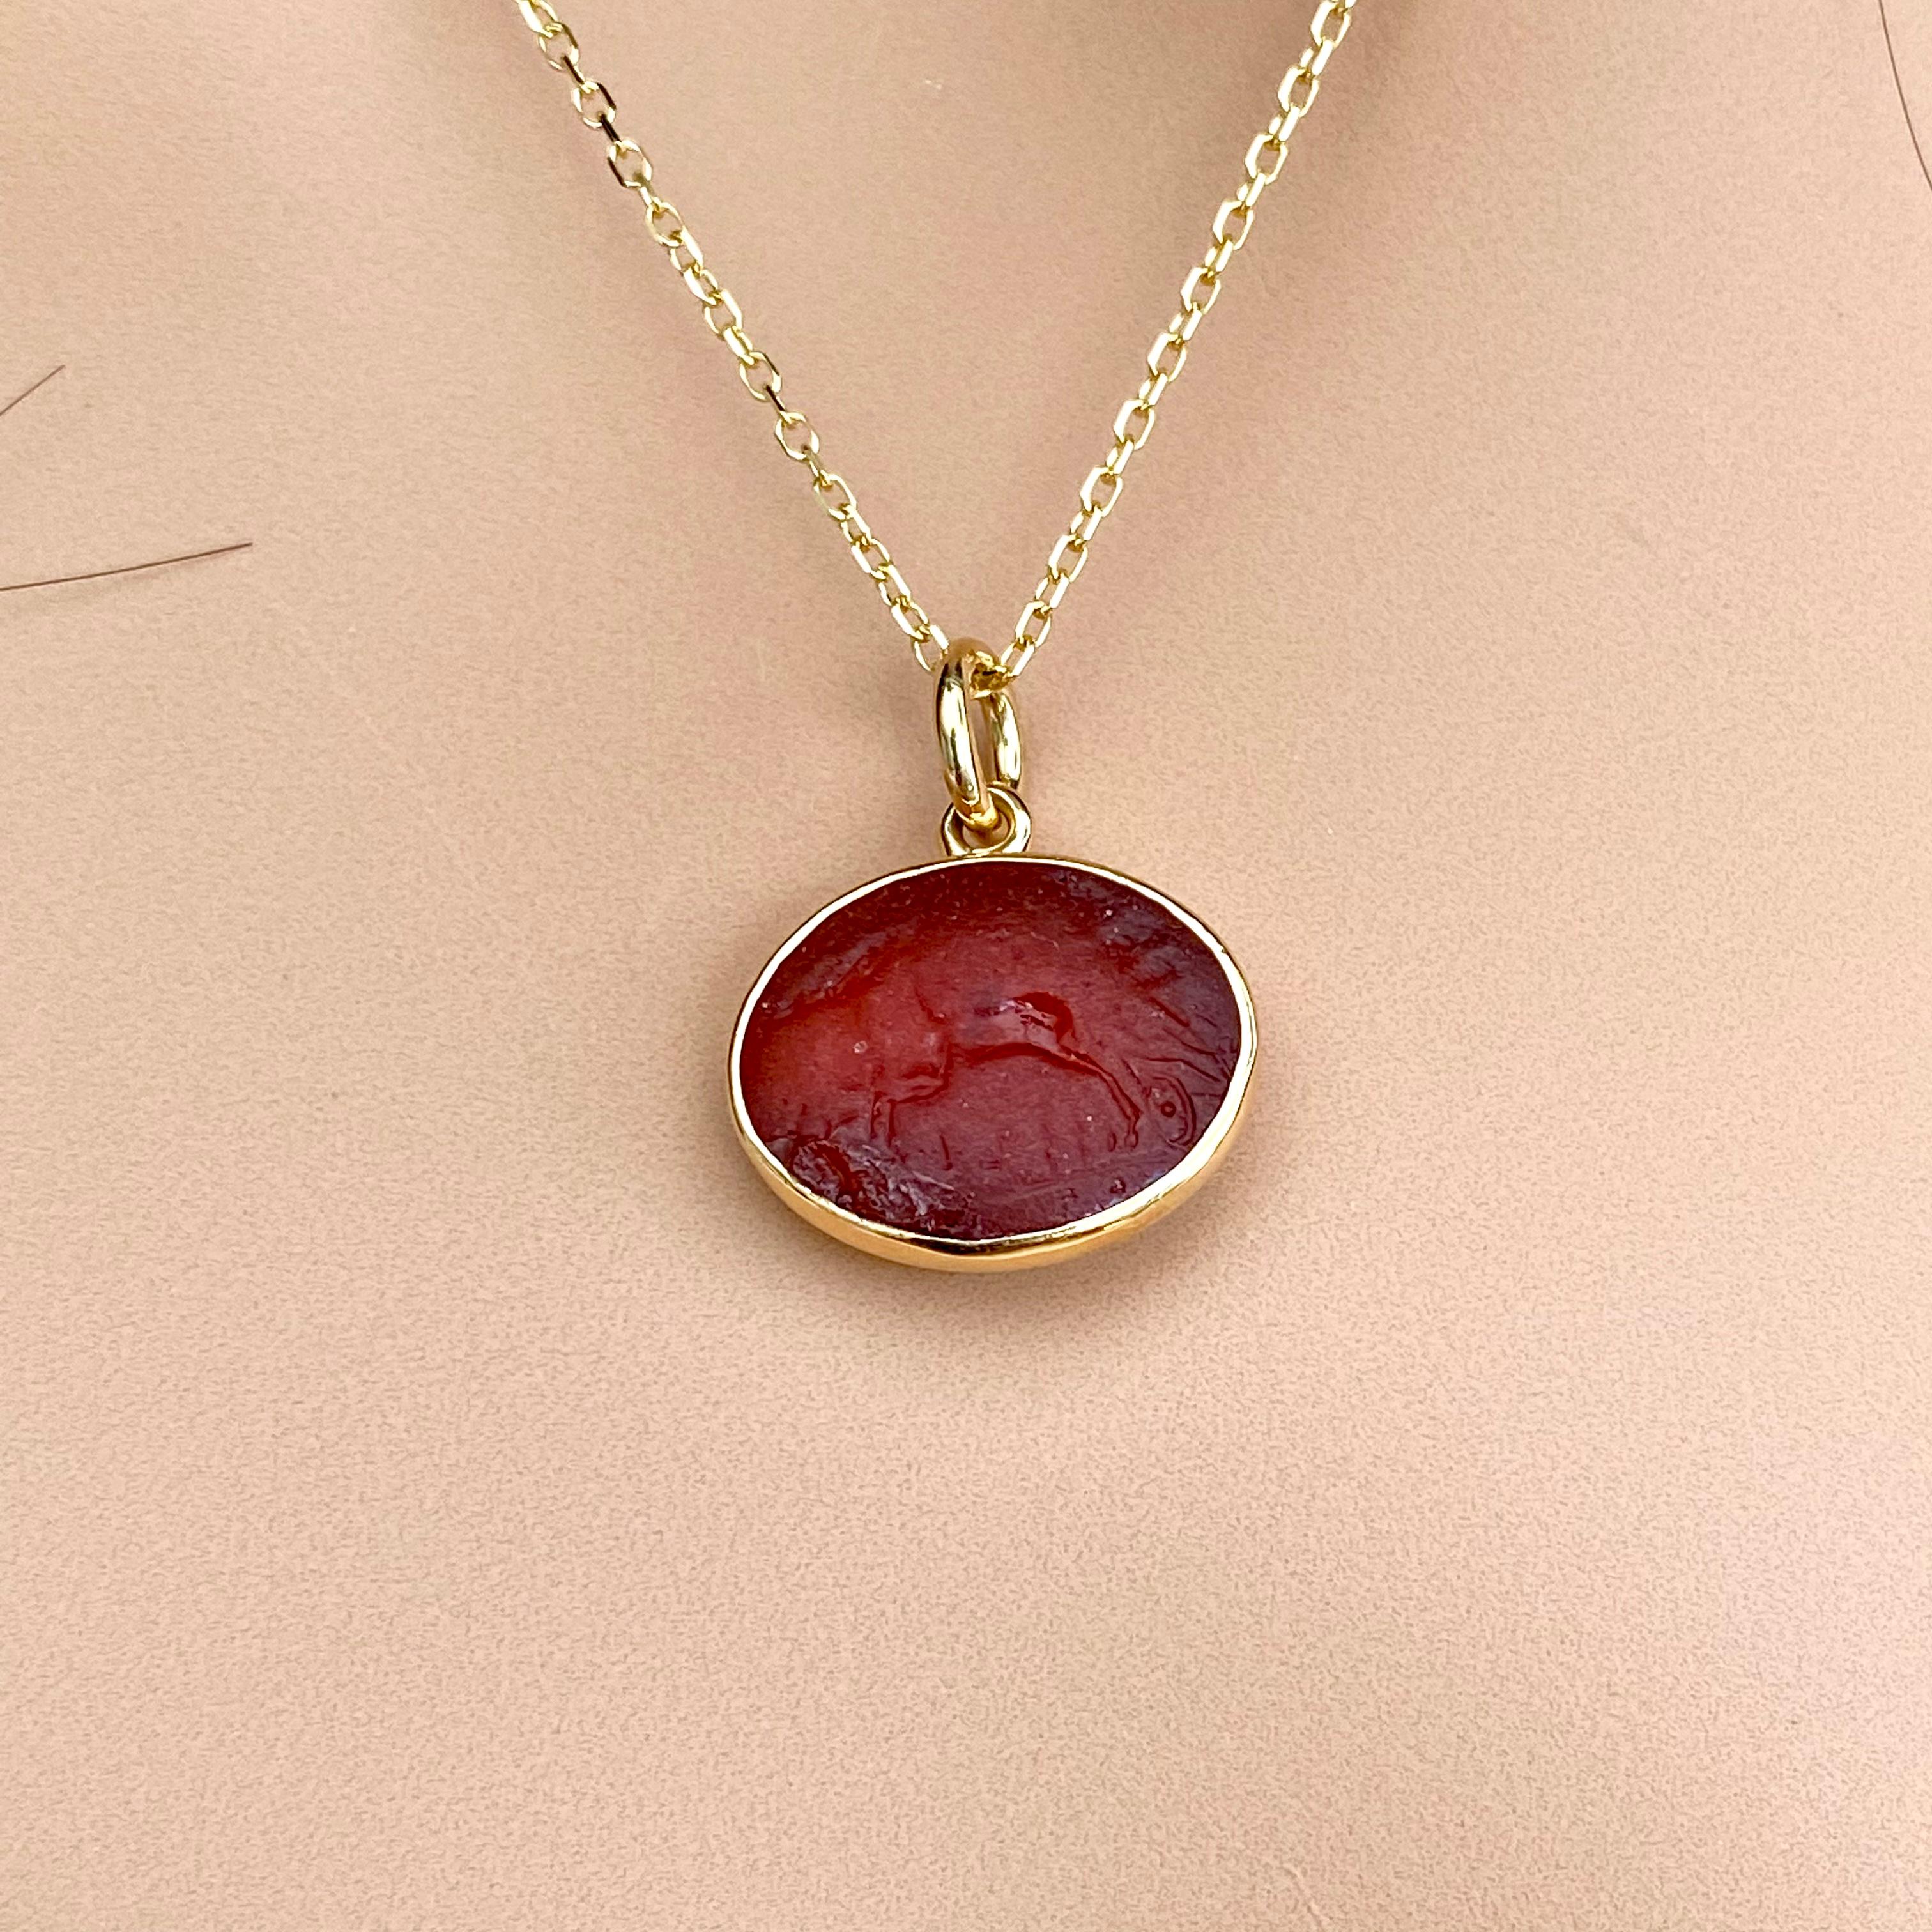 Women's or Men's Antique Carved Oval Carnelian Intaglio Depicting a Deer Yellow Gold Pendant